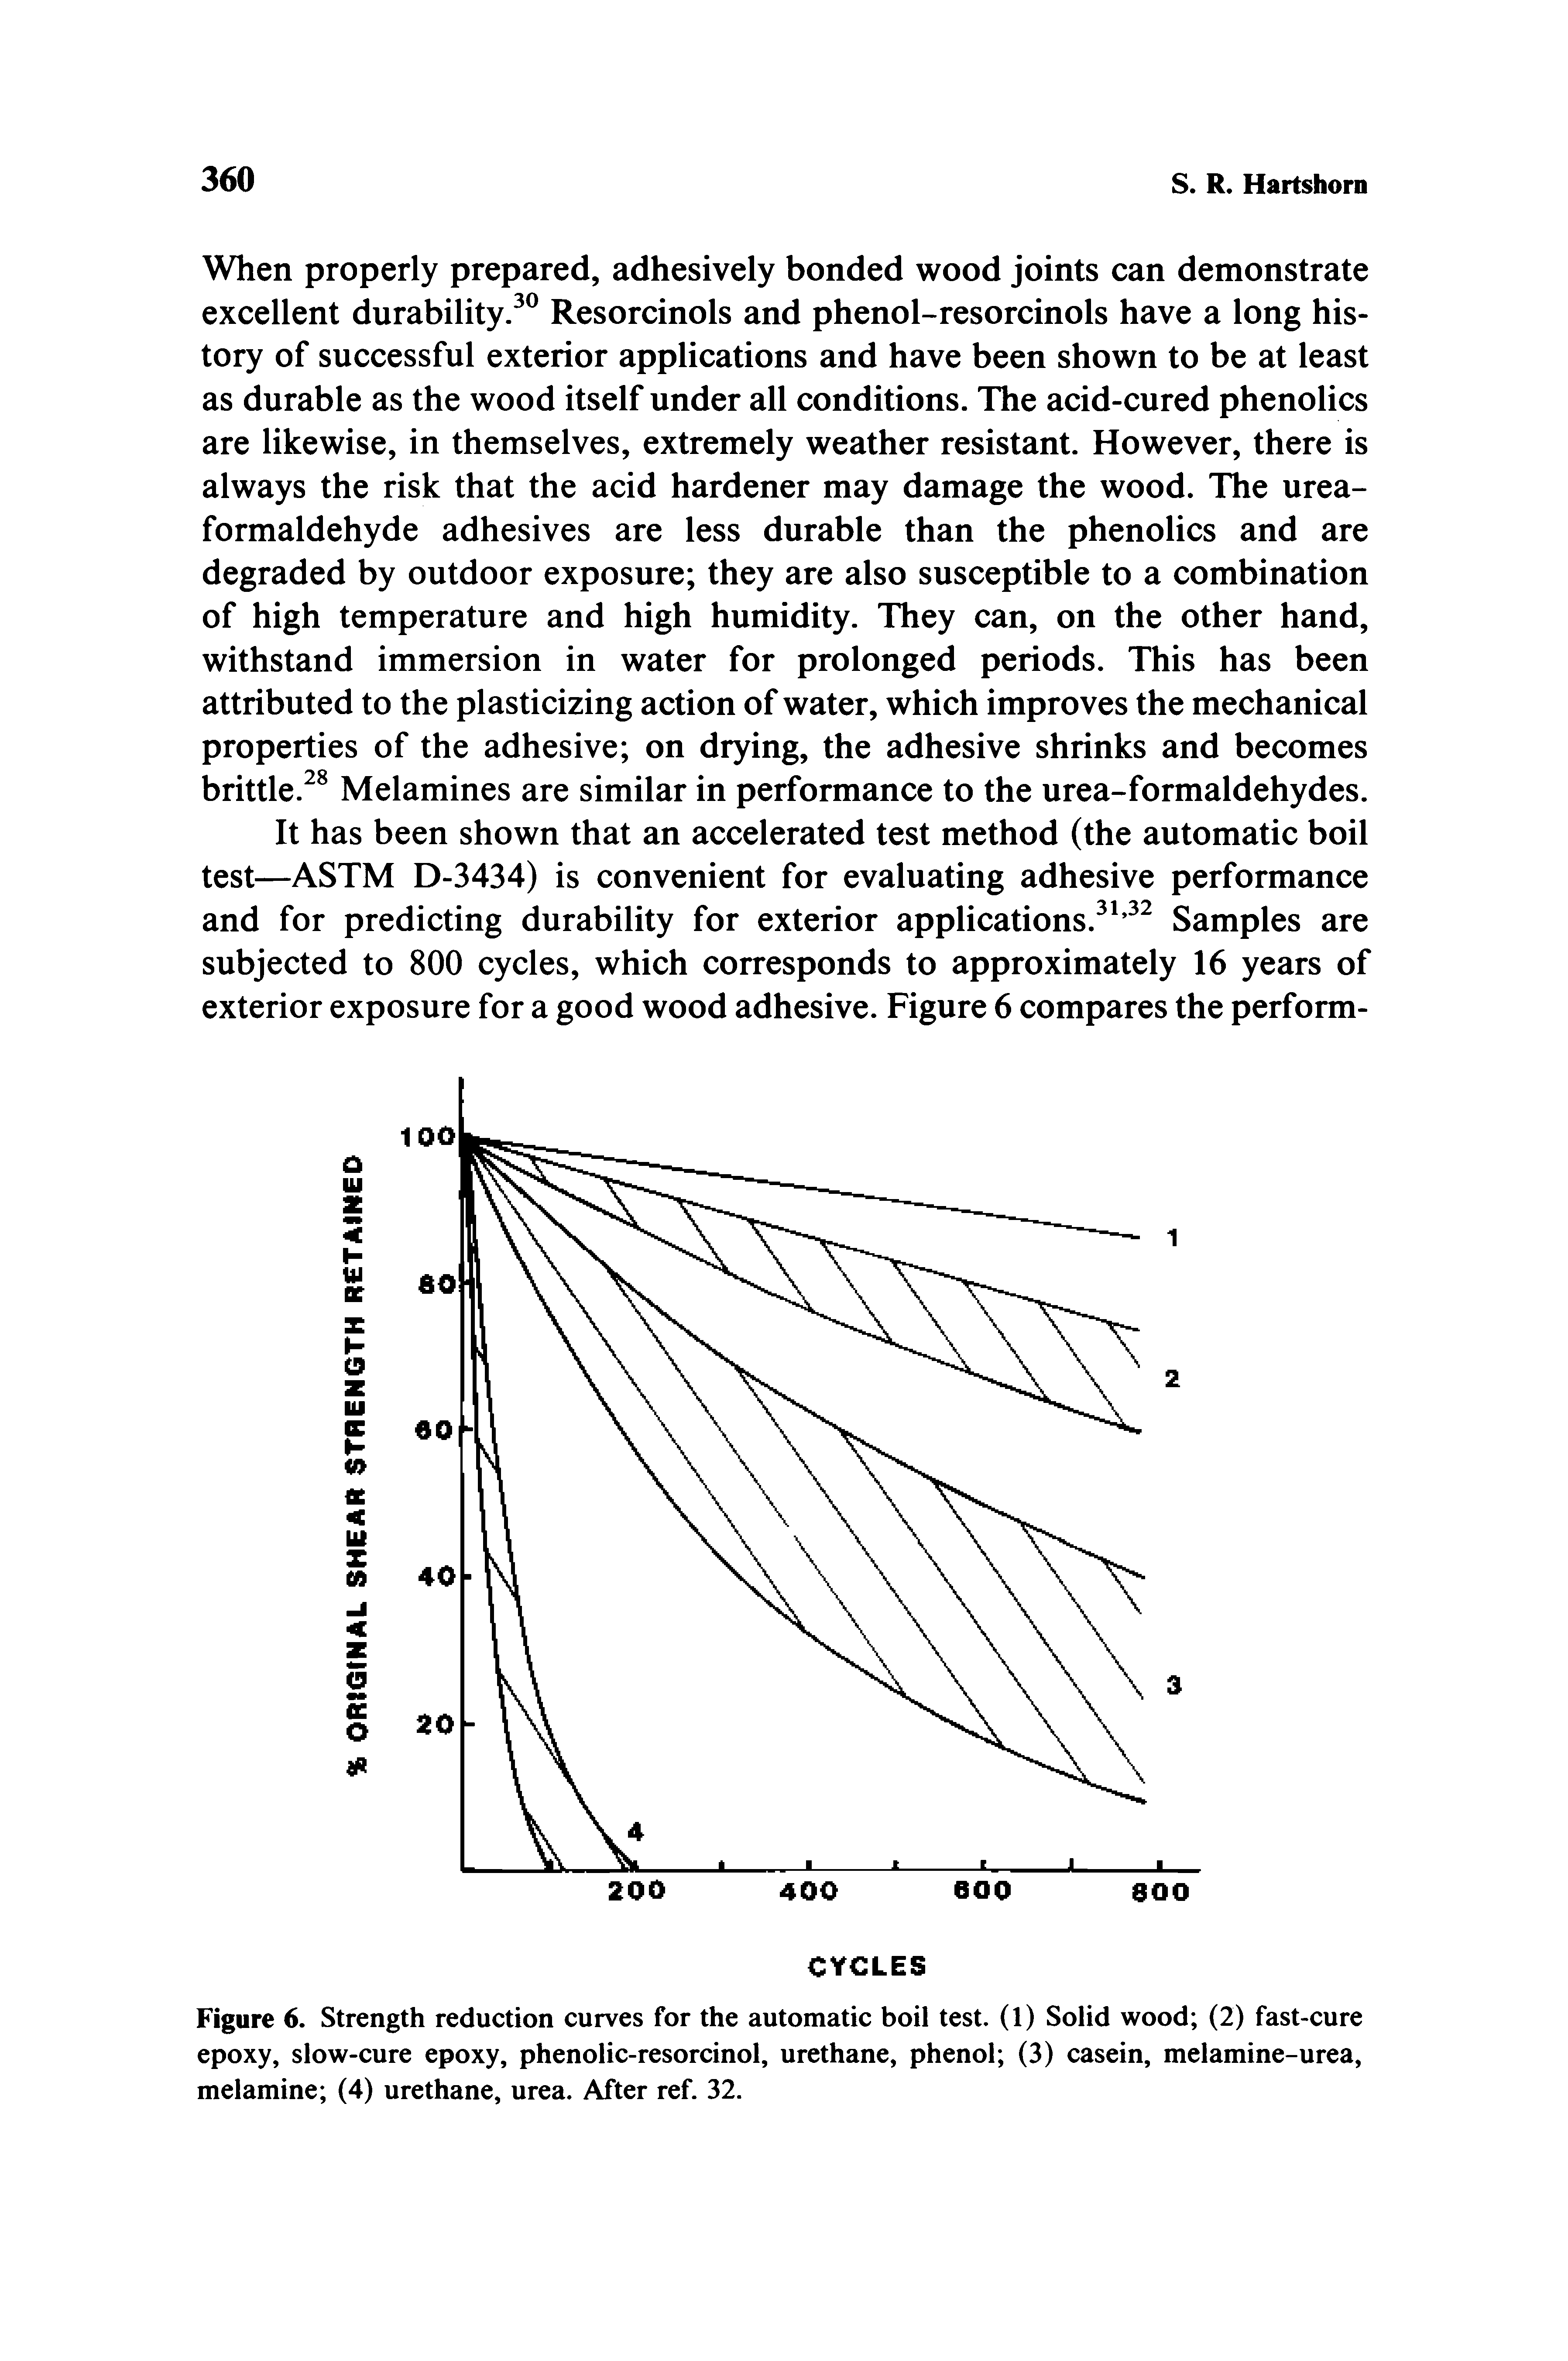 Figure 6. Strength reduction curves for the automatic boil test. (1) Solid wood (2) fast-cure epoxy, slow-cure epoxy, phenolic-resorcinol, urethane, phenol (3) casein, melamine-urea, melamine (4) urethane, urea. After ref. 32.